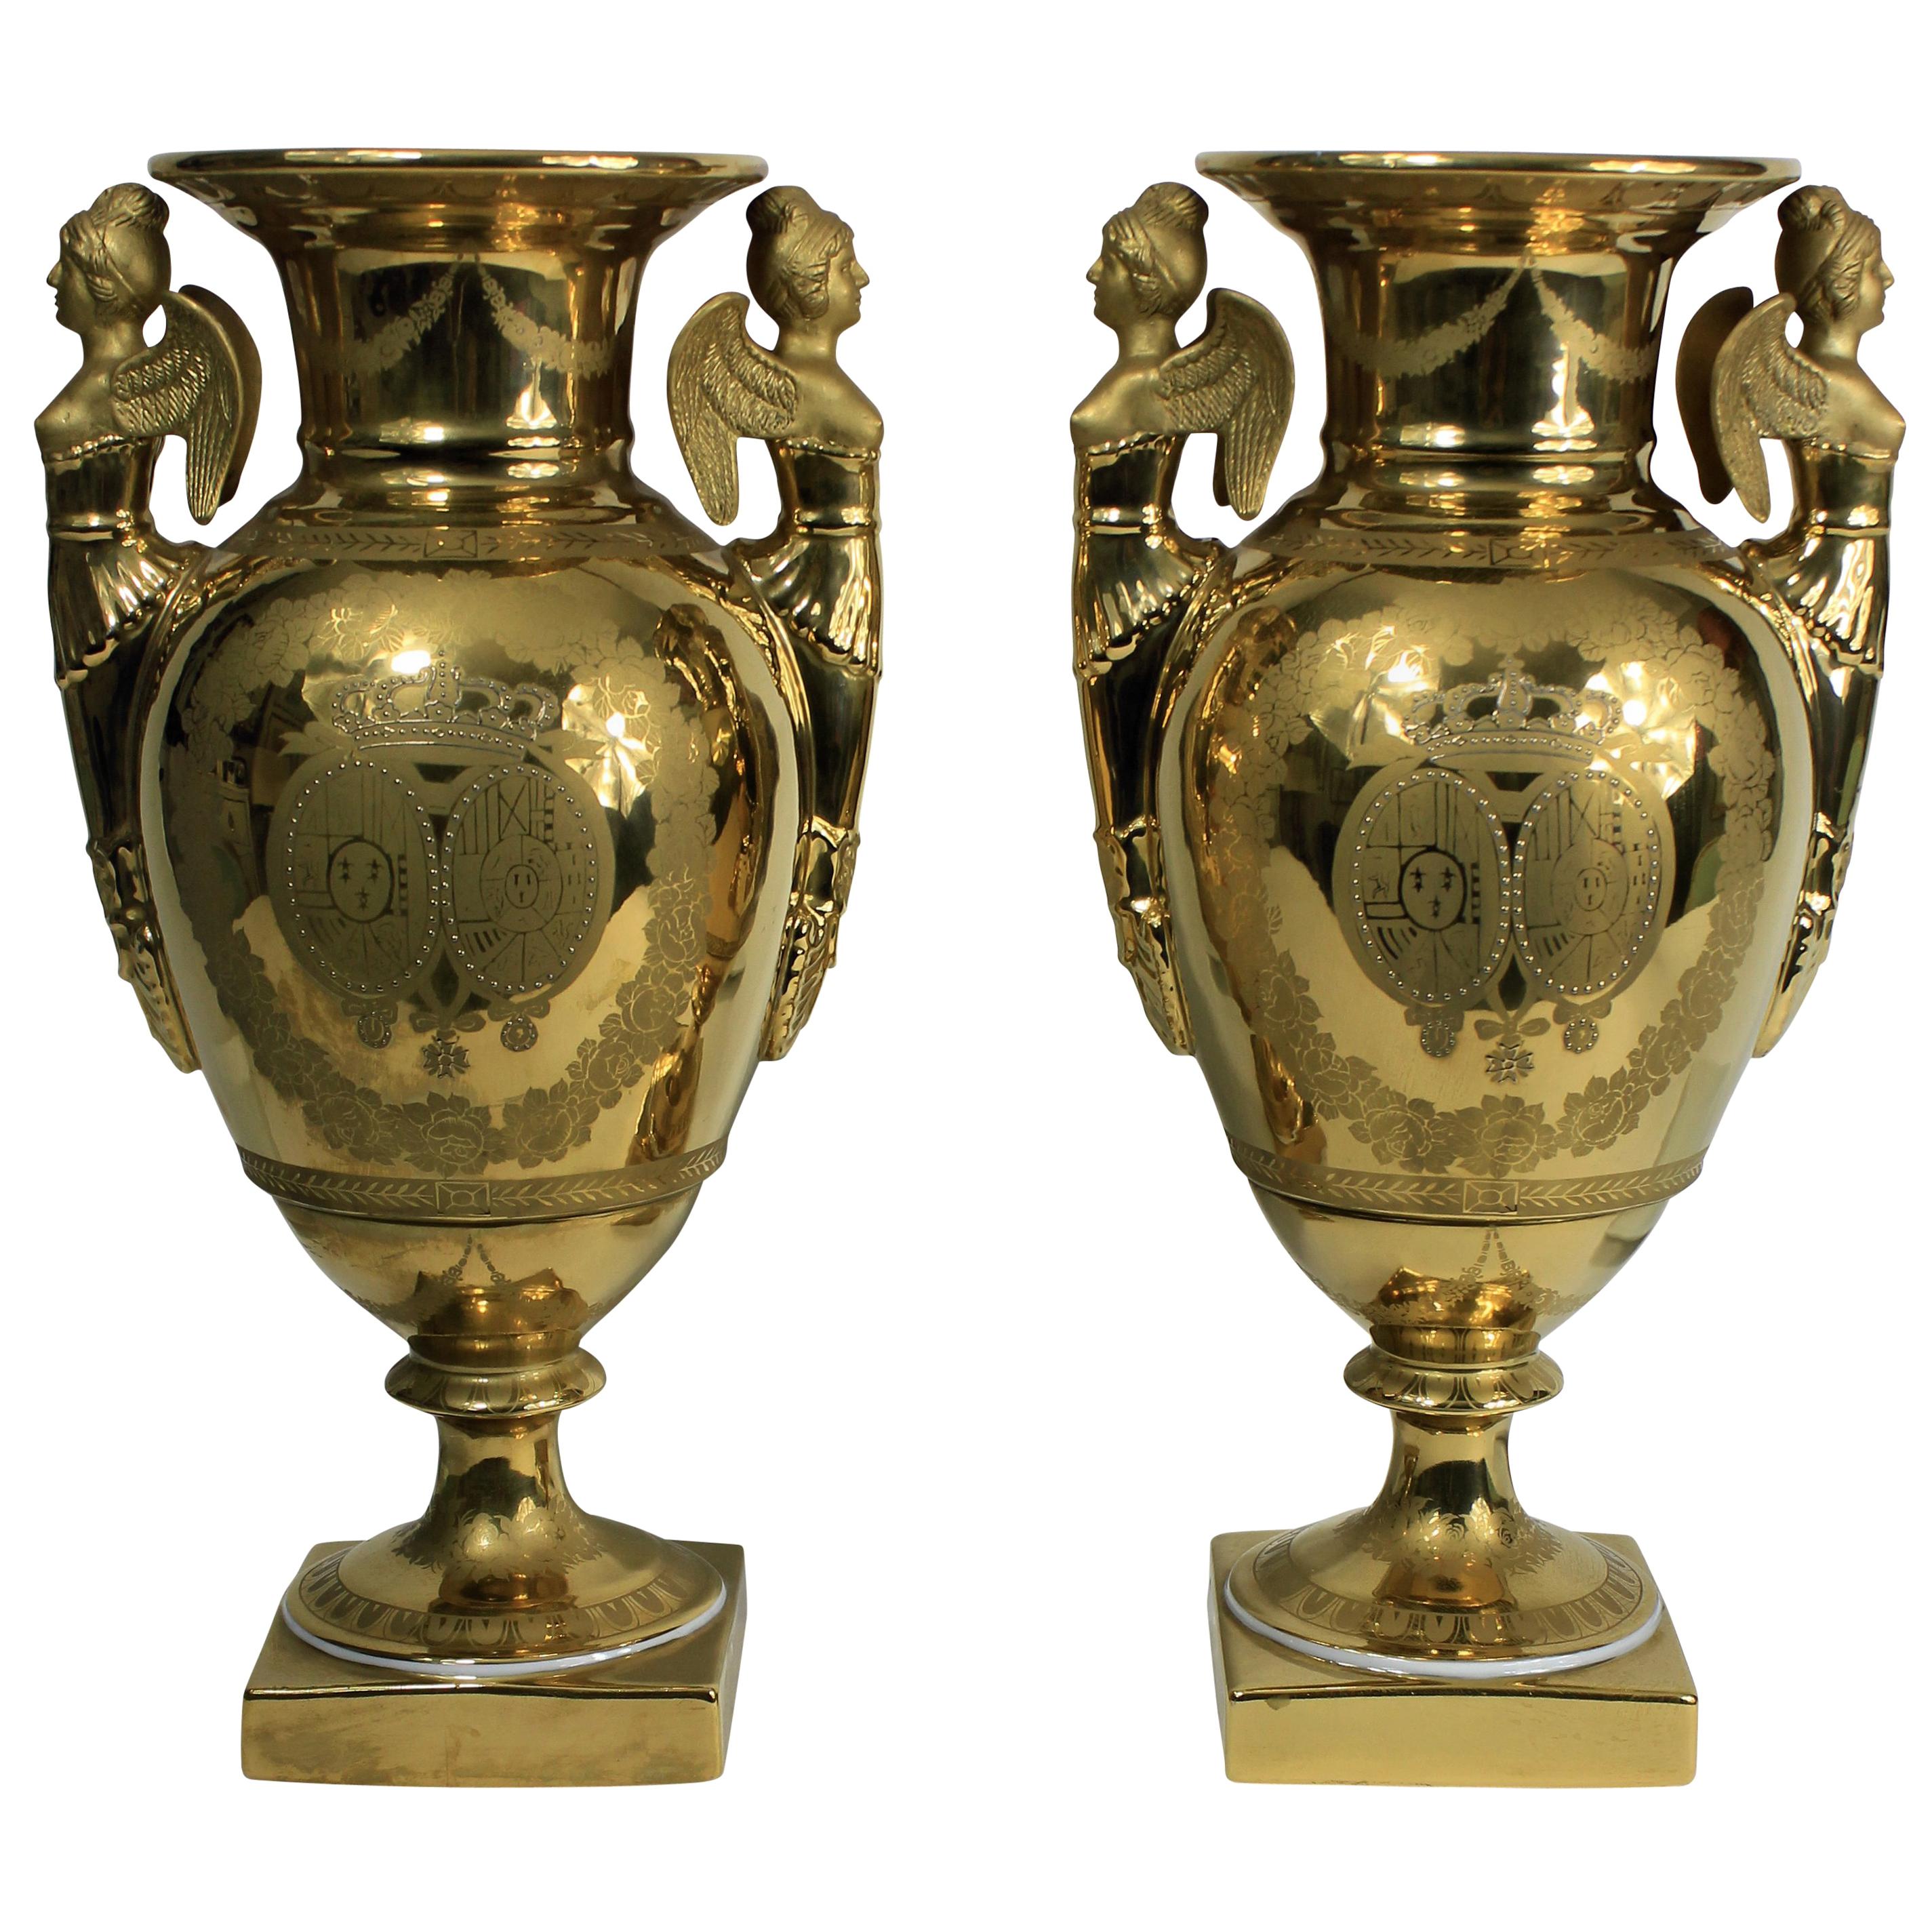 A pair of French hand painted ground gold porcelain vases, depicting classical scenes, with an armorial crest and crown.